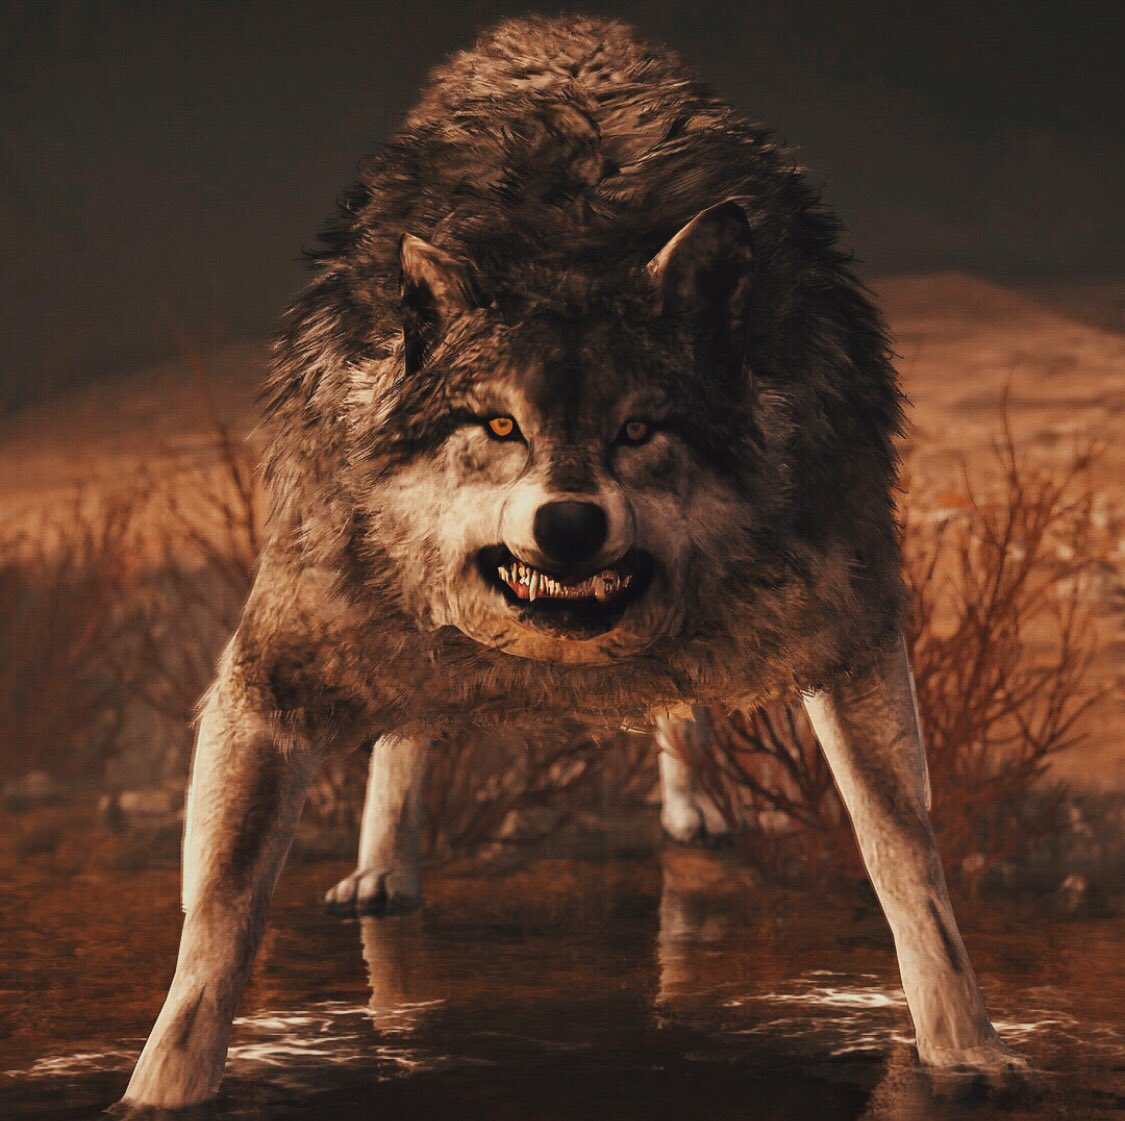 My first shots from Assassins Creeed Odessey, Enjoy! 😊🙏🏼 @ubisoft #ubisoft #assassinscreedodessey #assassinscreed #wildlife #wolf #photomode #dancingwithwolves #sparta #spartans